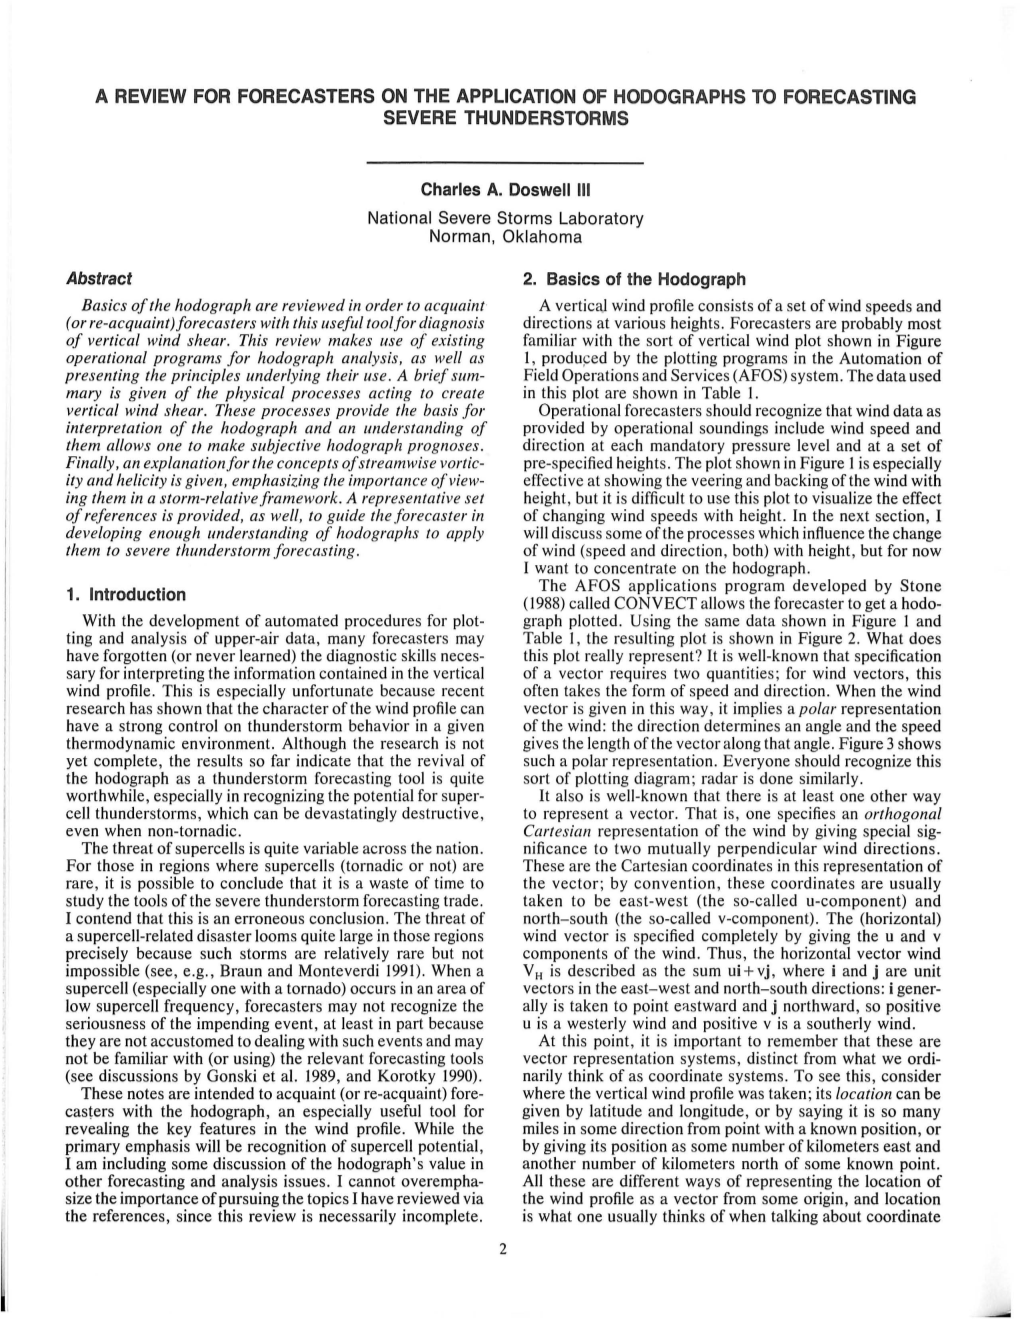 A REVIEW for FORECASTERS on the APPLICATION of HODOGRAPHS to FORECASTING SEVERE THUNDERSTORMS National Severe Storms Laboratory